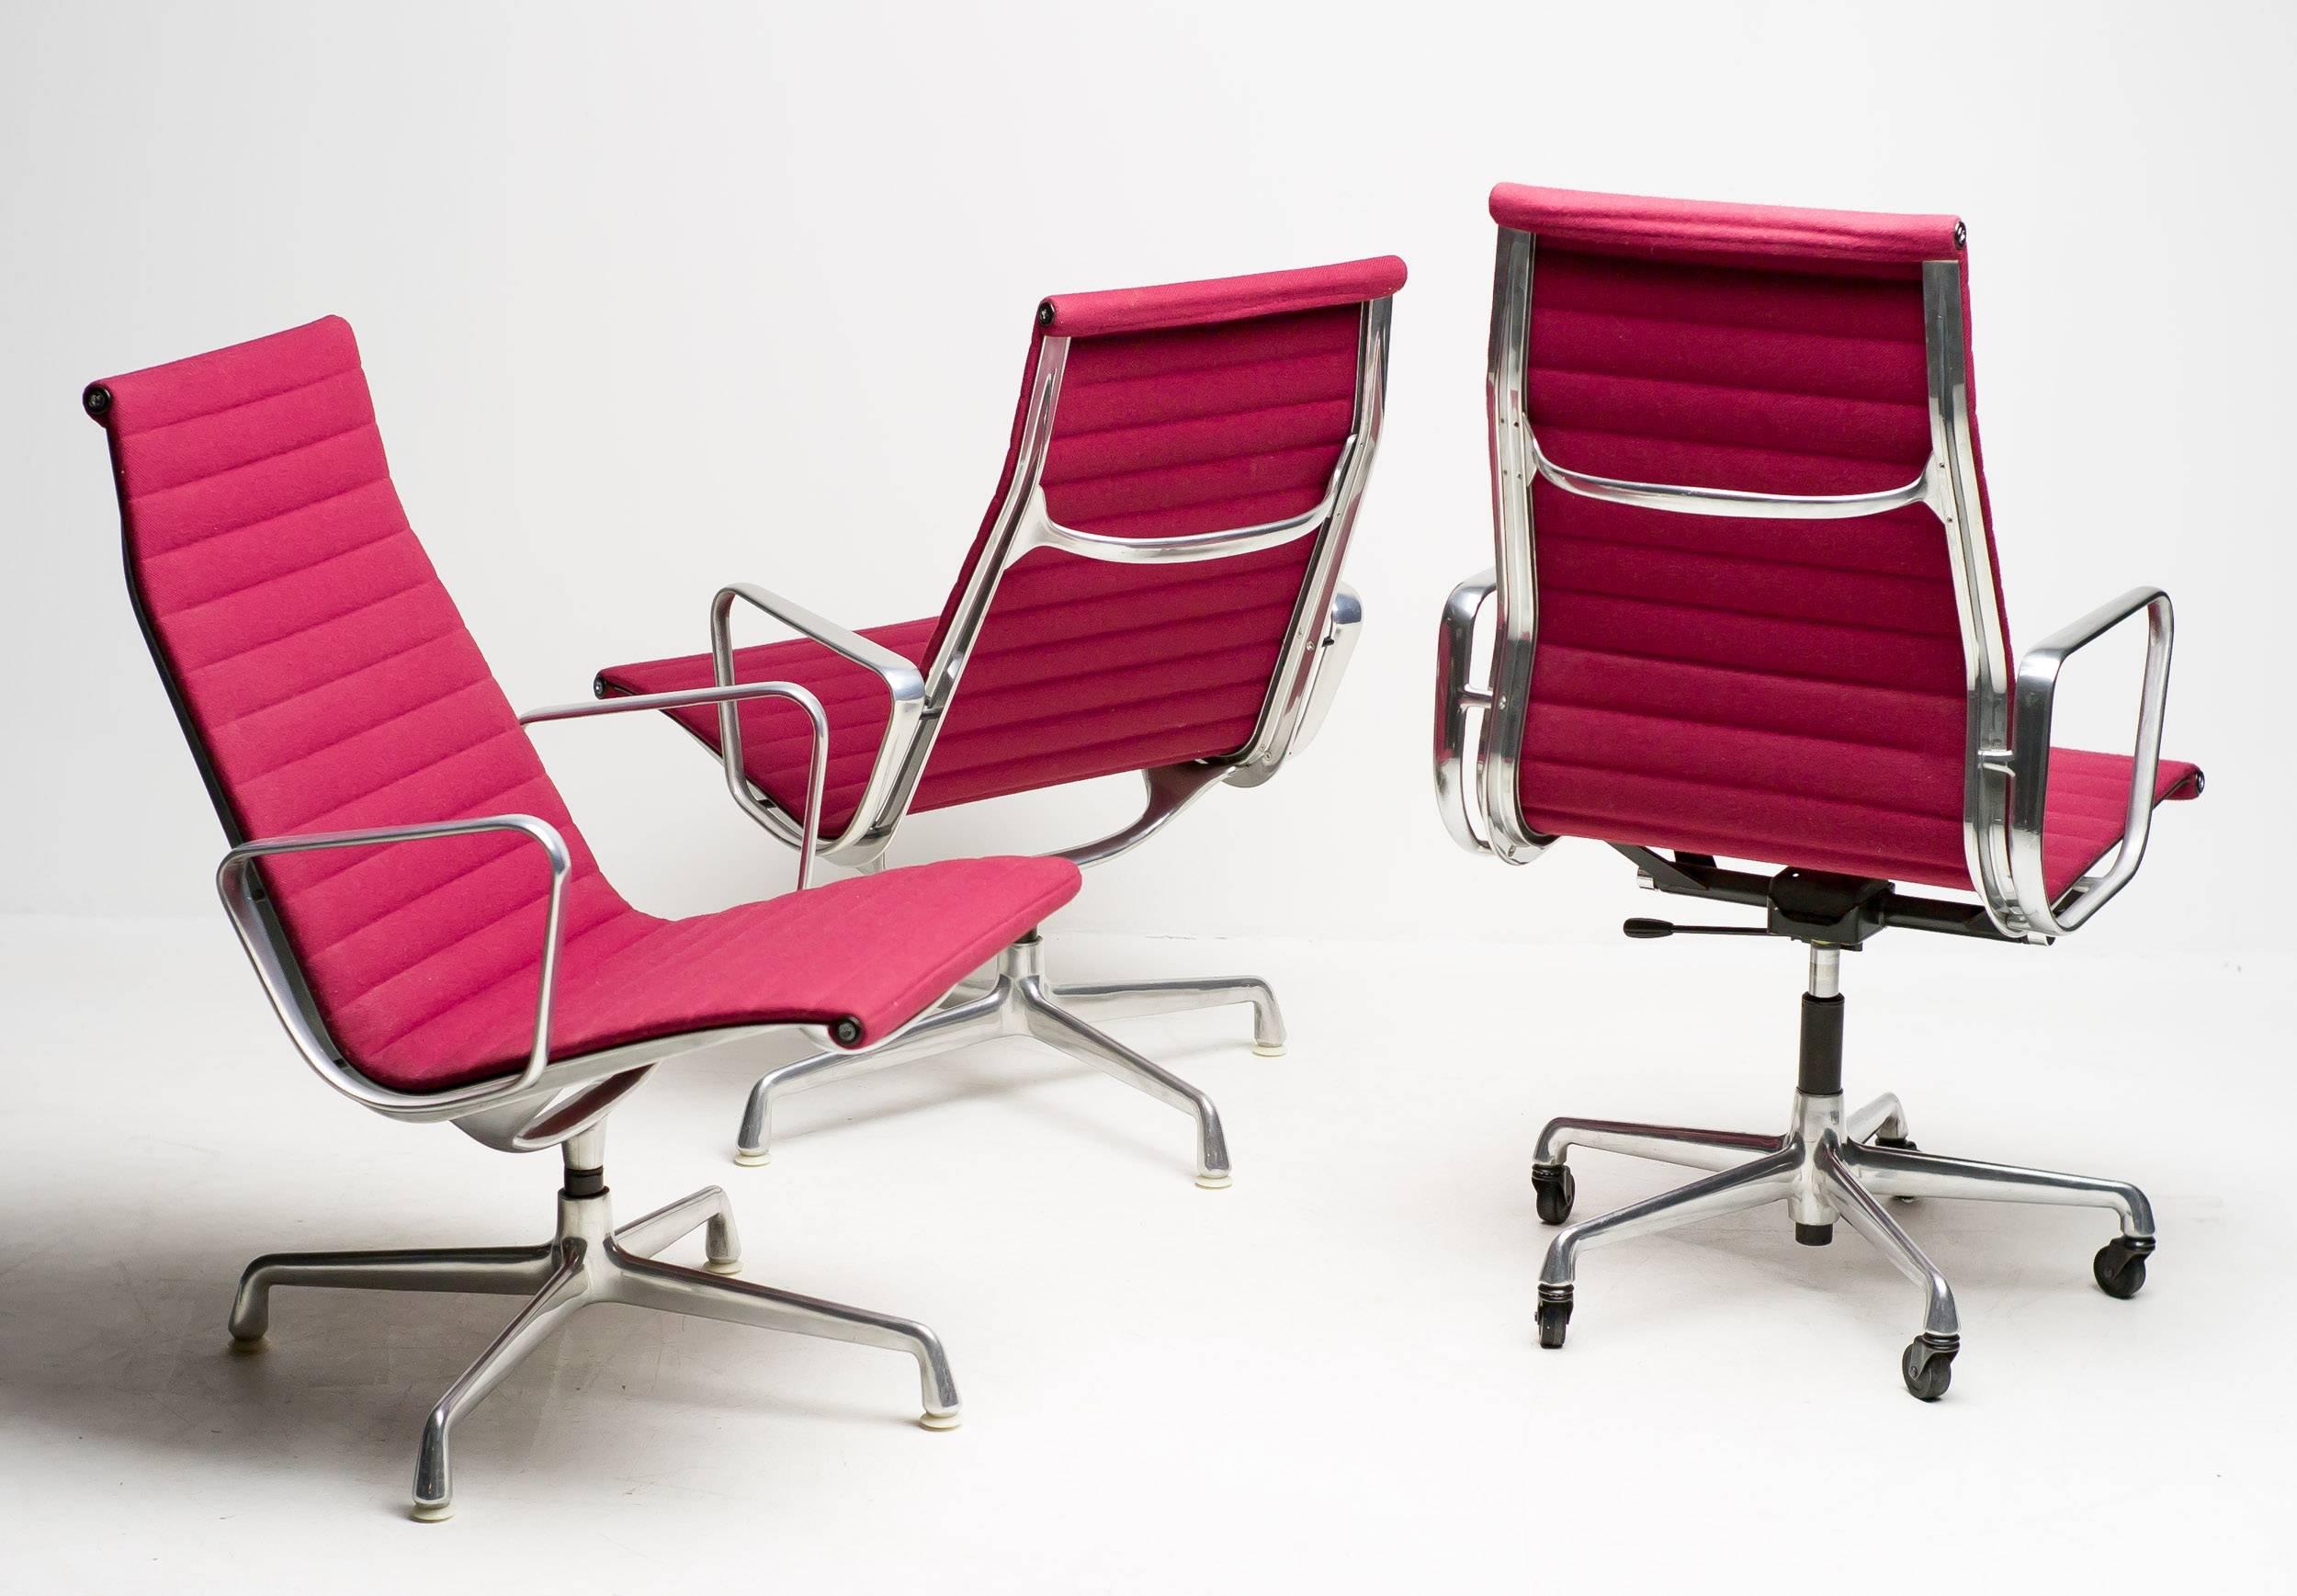 Aluminium group set in red Hopsak by Charles Eames for Herman Miller.

Consists of two EA116 lounge chairs and one EA119 desk chair.
Lounge chairs on swivel base, desk chair with tilt mechanism and gaslift.

Excellent fast & affordable